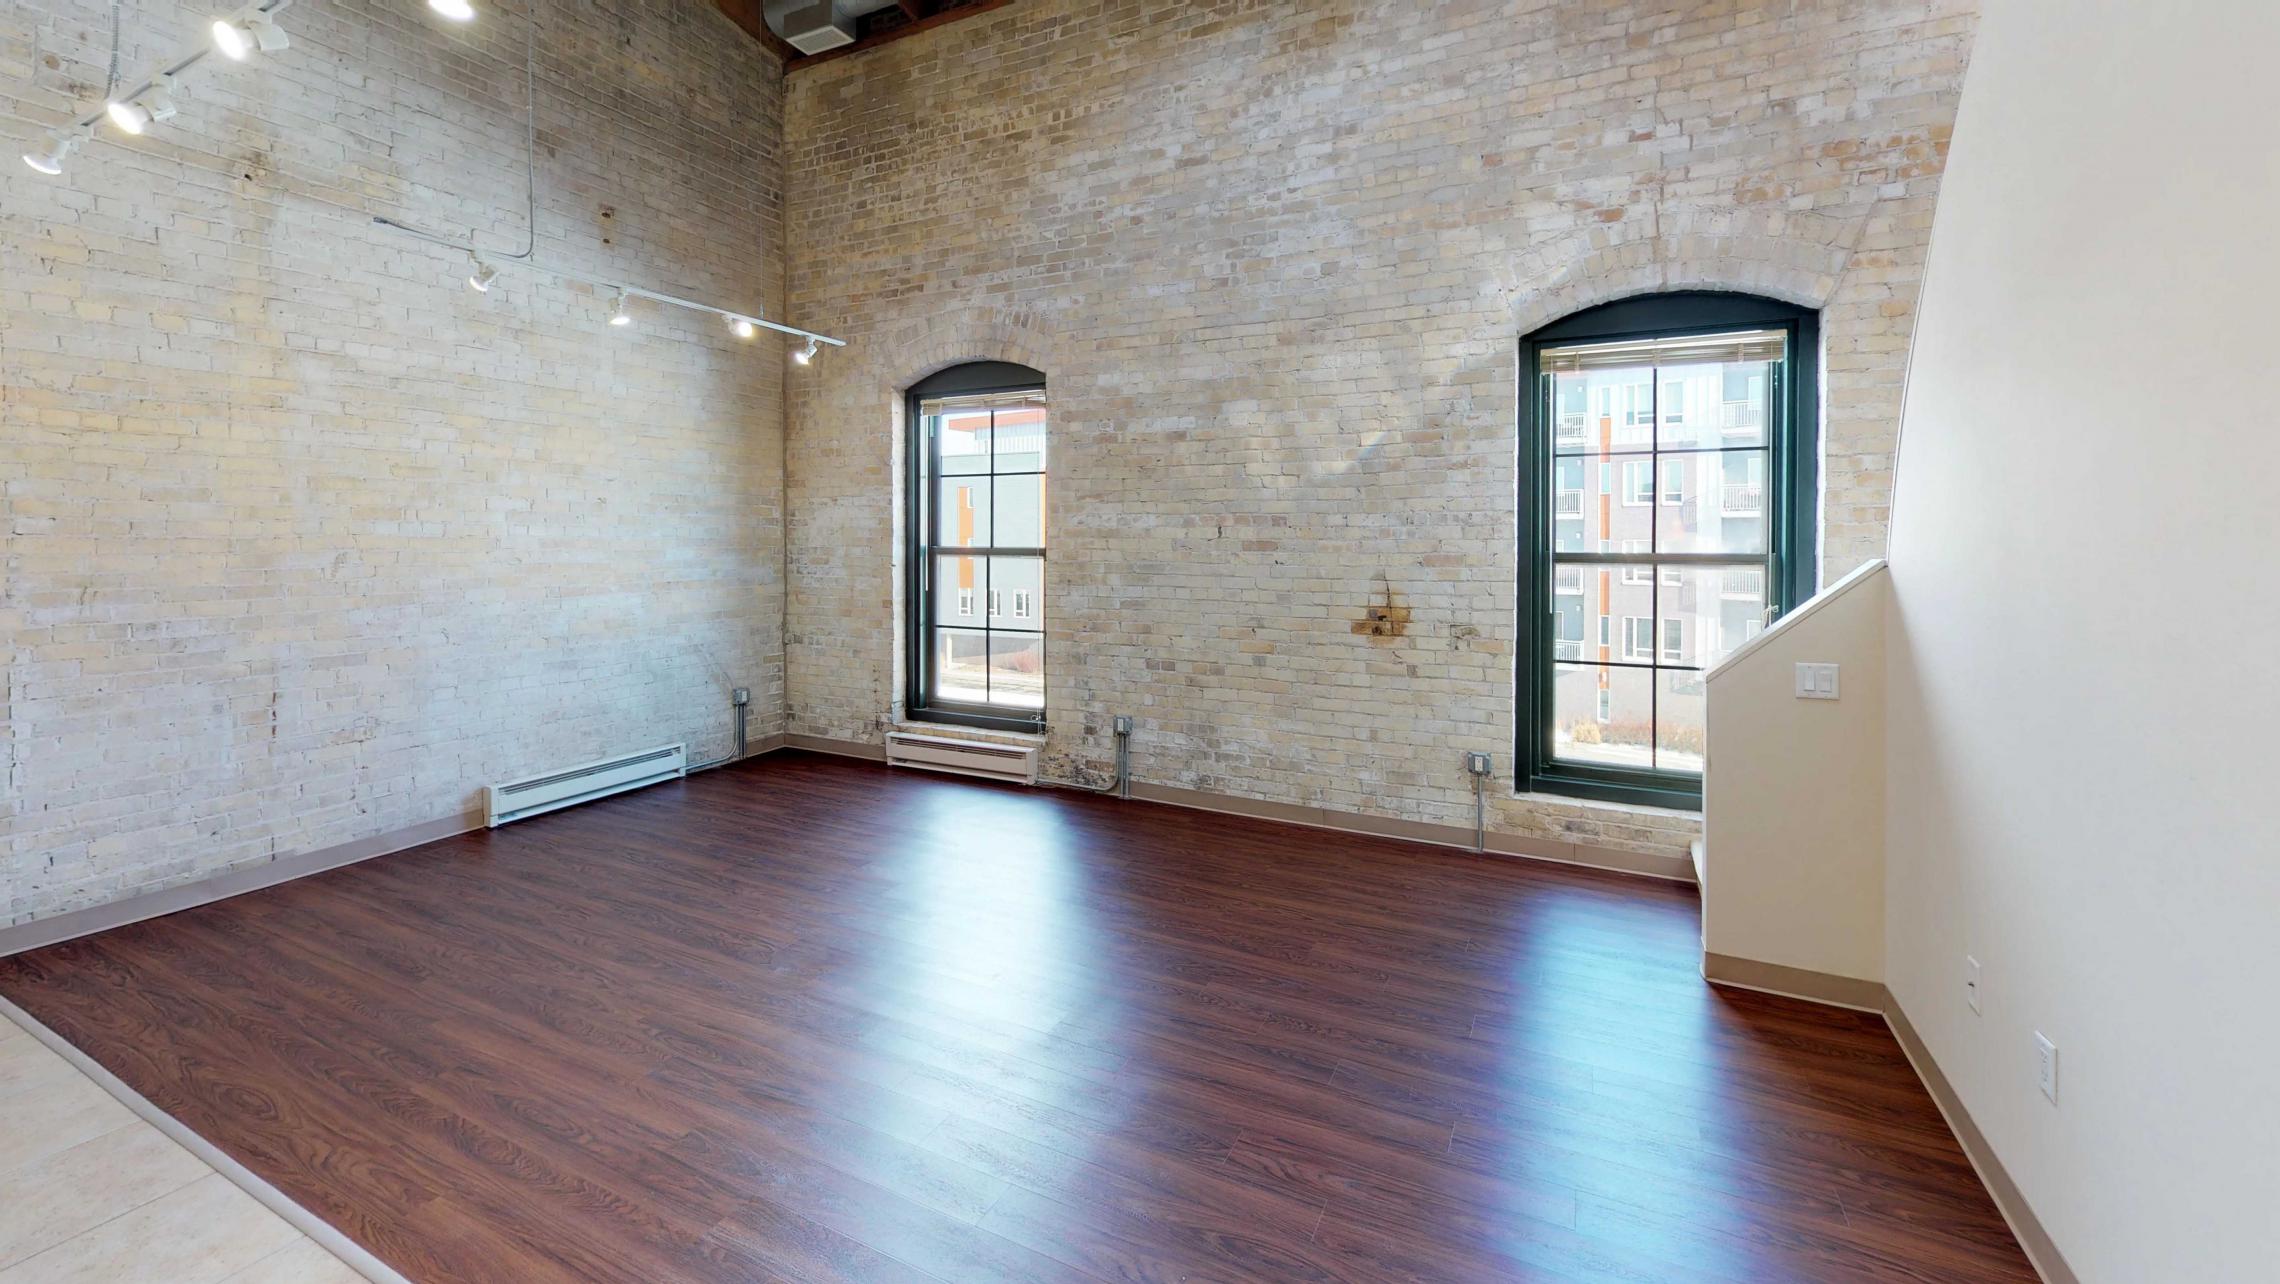 Tobacco-Lofts-Apartment-E307-Historic-Downtown-Lofted-Two-Bedroom-Madison-Exposed-Brick-Design-Beams-Dining